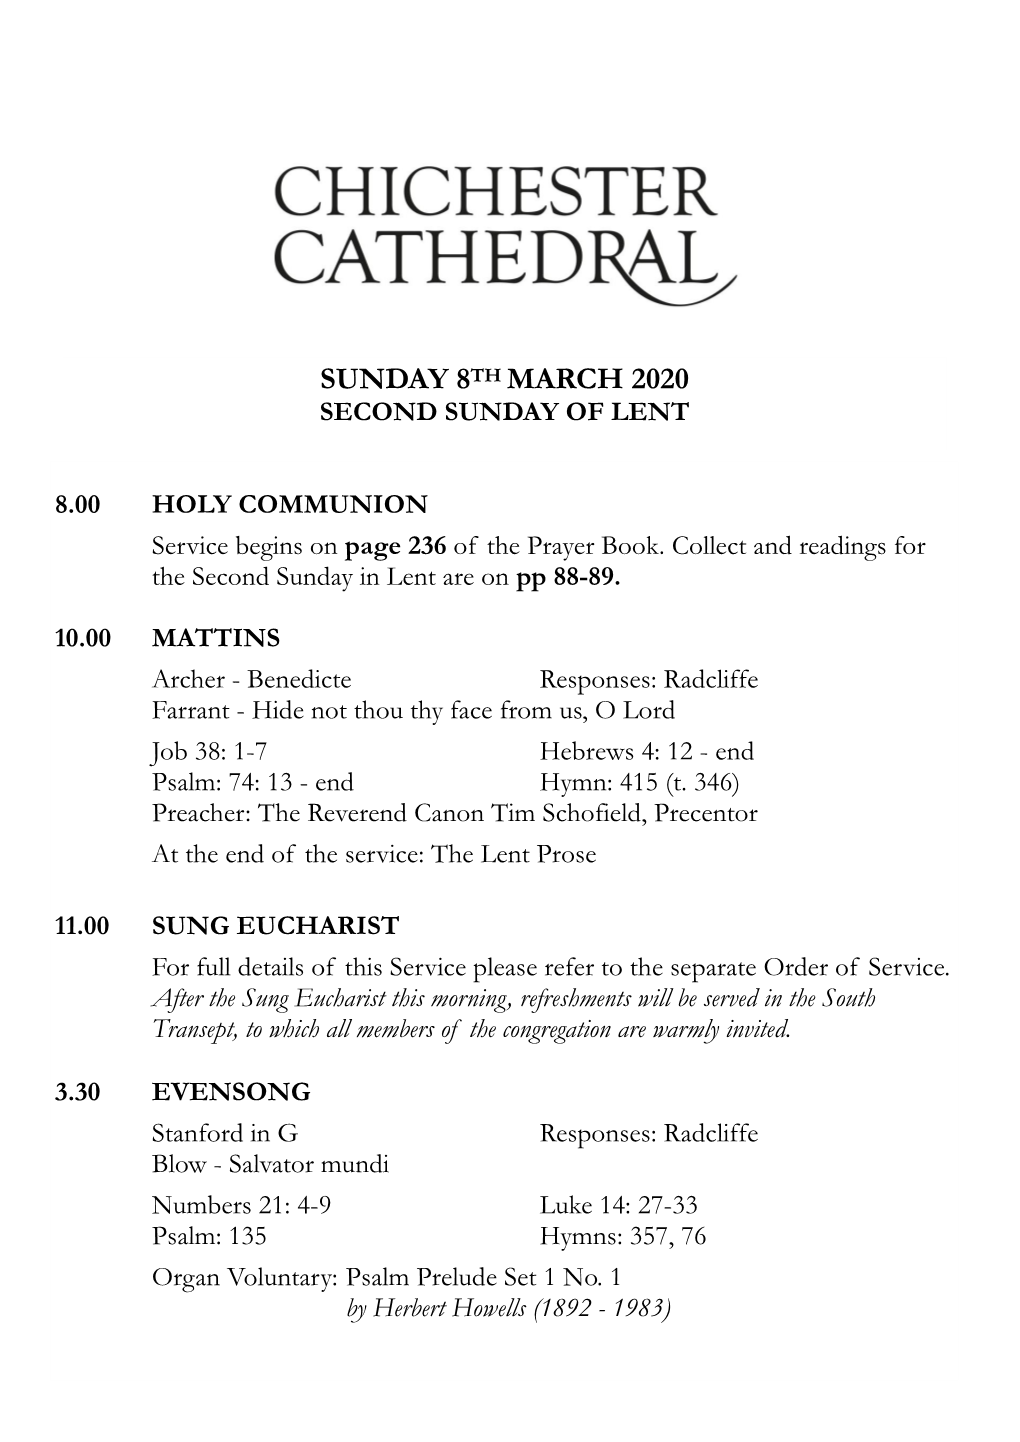 Sunday 8Th March 2020 Second Sunday of Lent